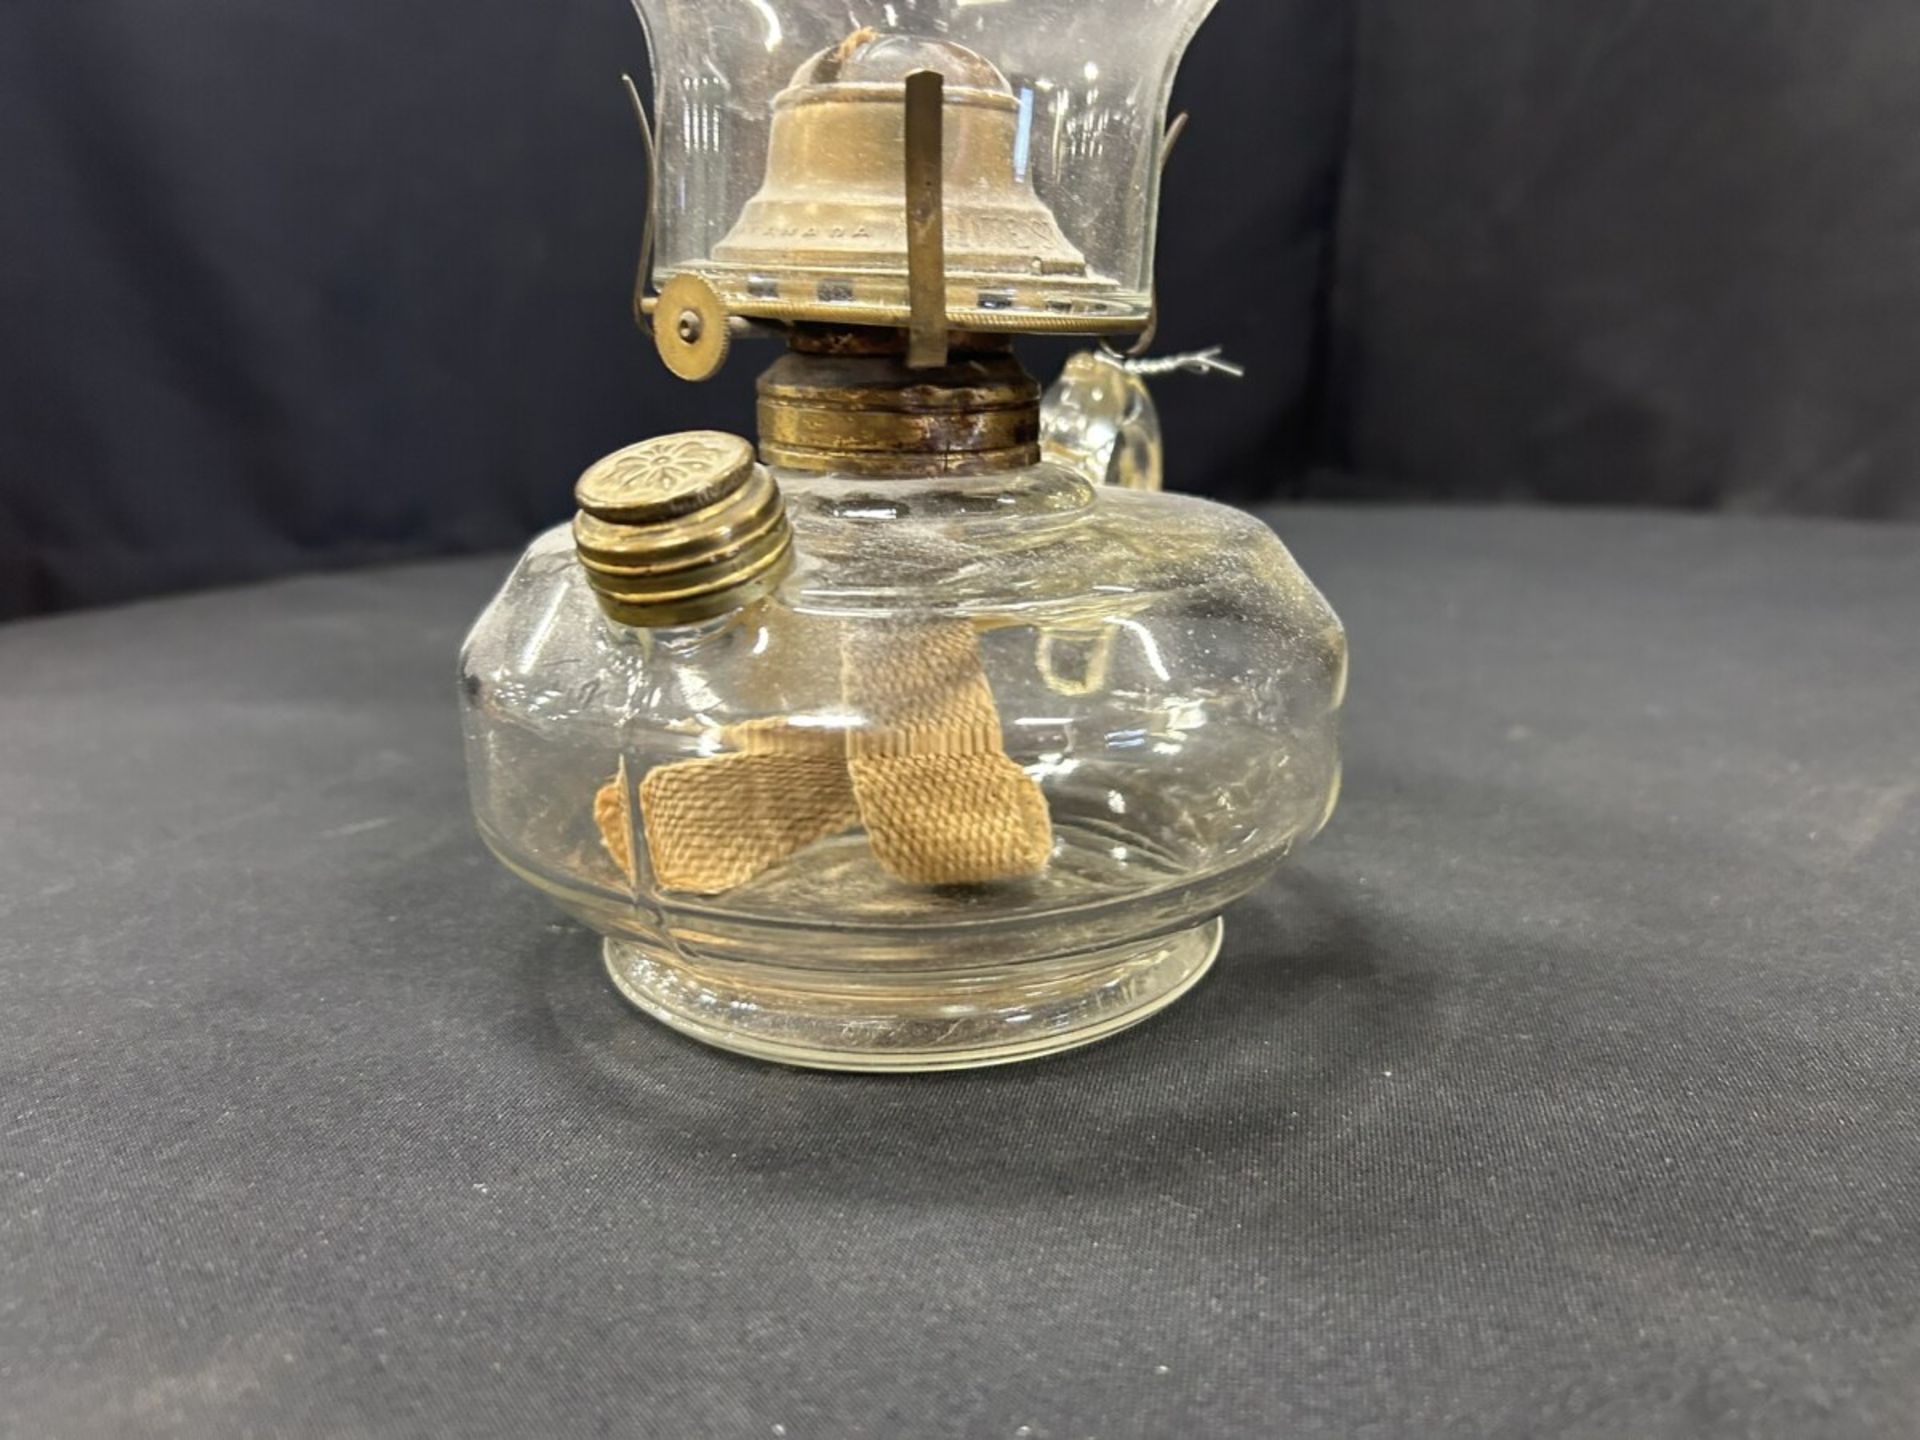 ANTIQUE FINGER OIL LAMP, WALL MOUNTED OIL LAMP, 1-OIL LAMP (NO GLOBE) - Image 10 of 12